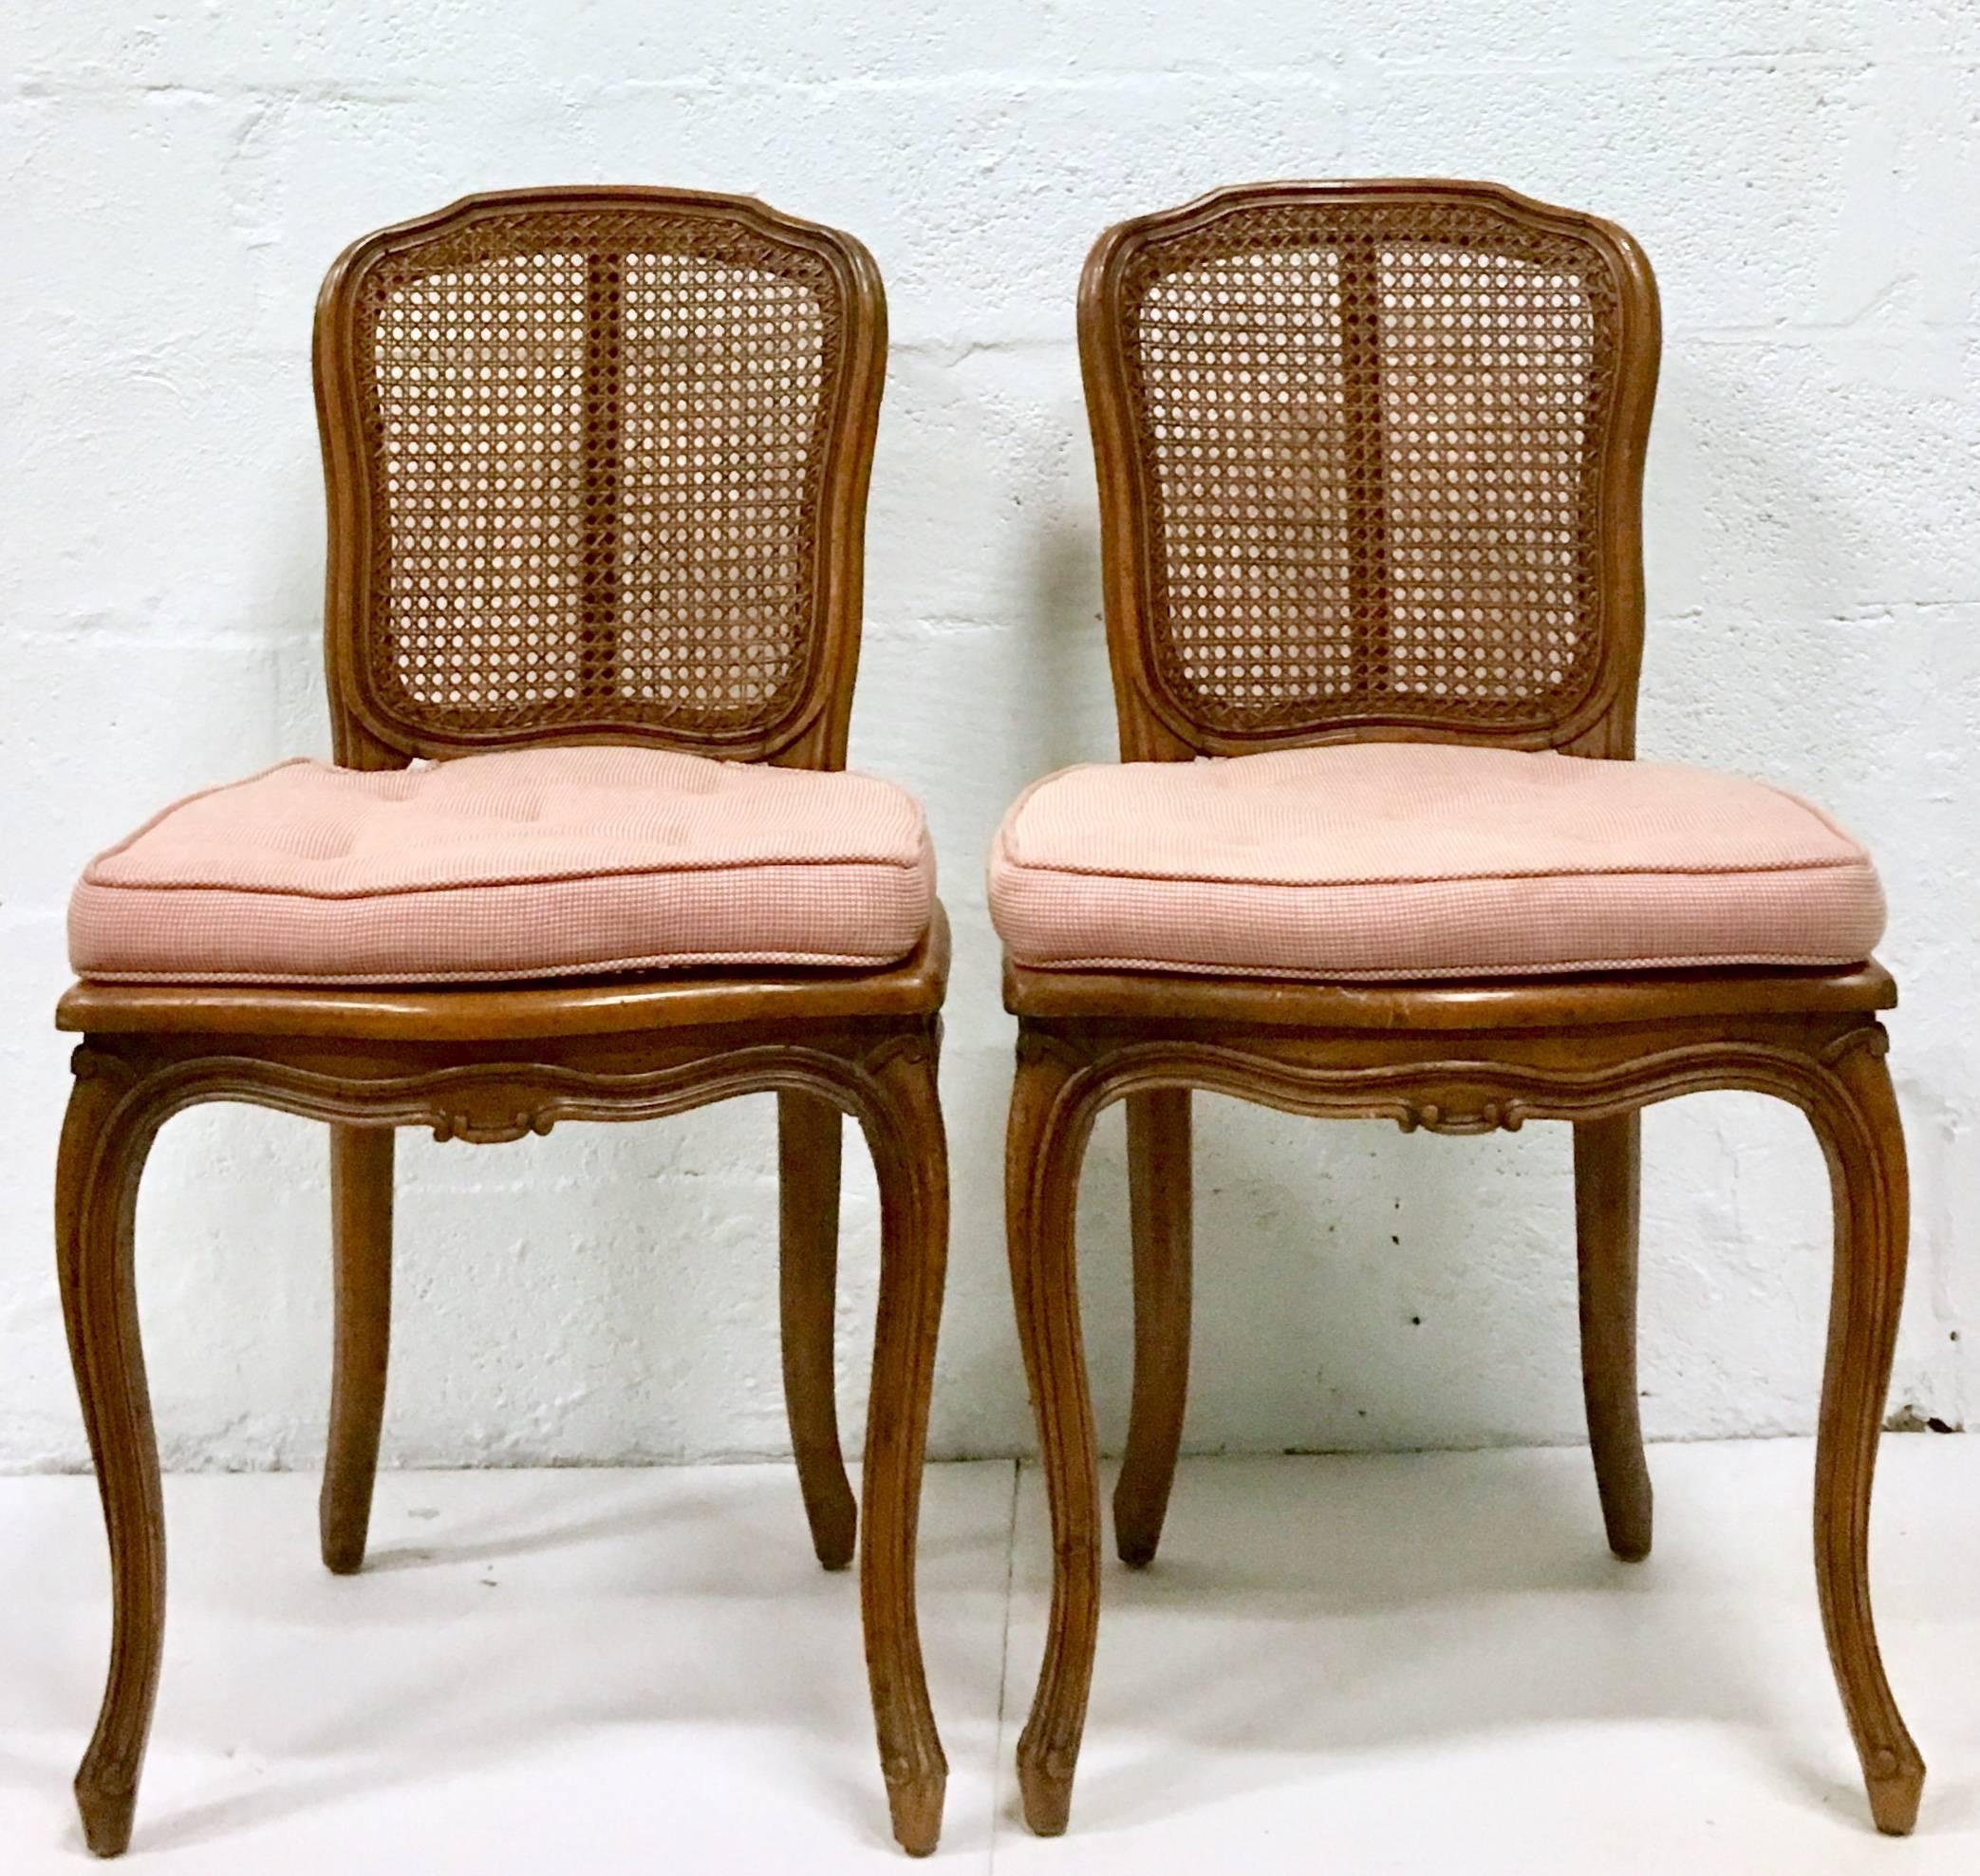 Pair of French Provincial style double cane wicker and carved wood chairs. Features double cane seat and back. Each chair includes a pink gingham check cotton blend and button tufted slip cover seat cushion with Velcro ties.. Seat height, 16